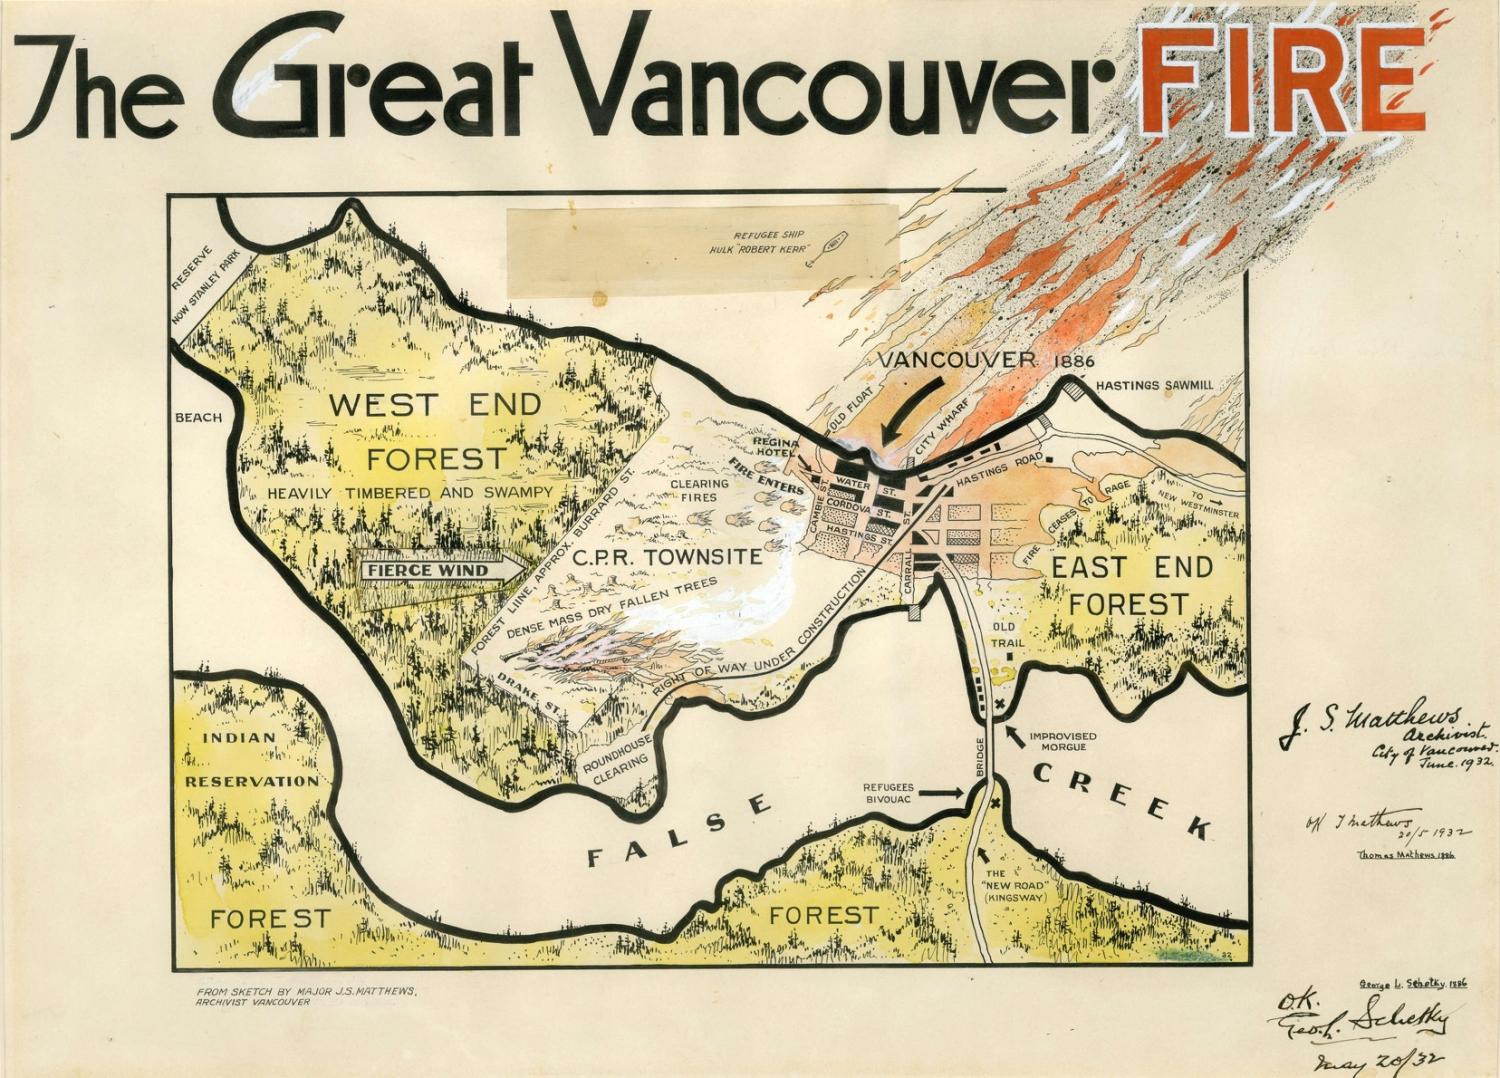 A drawn map of the Great Vancouver Fire.